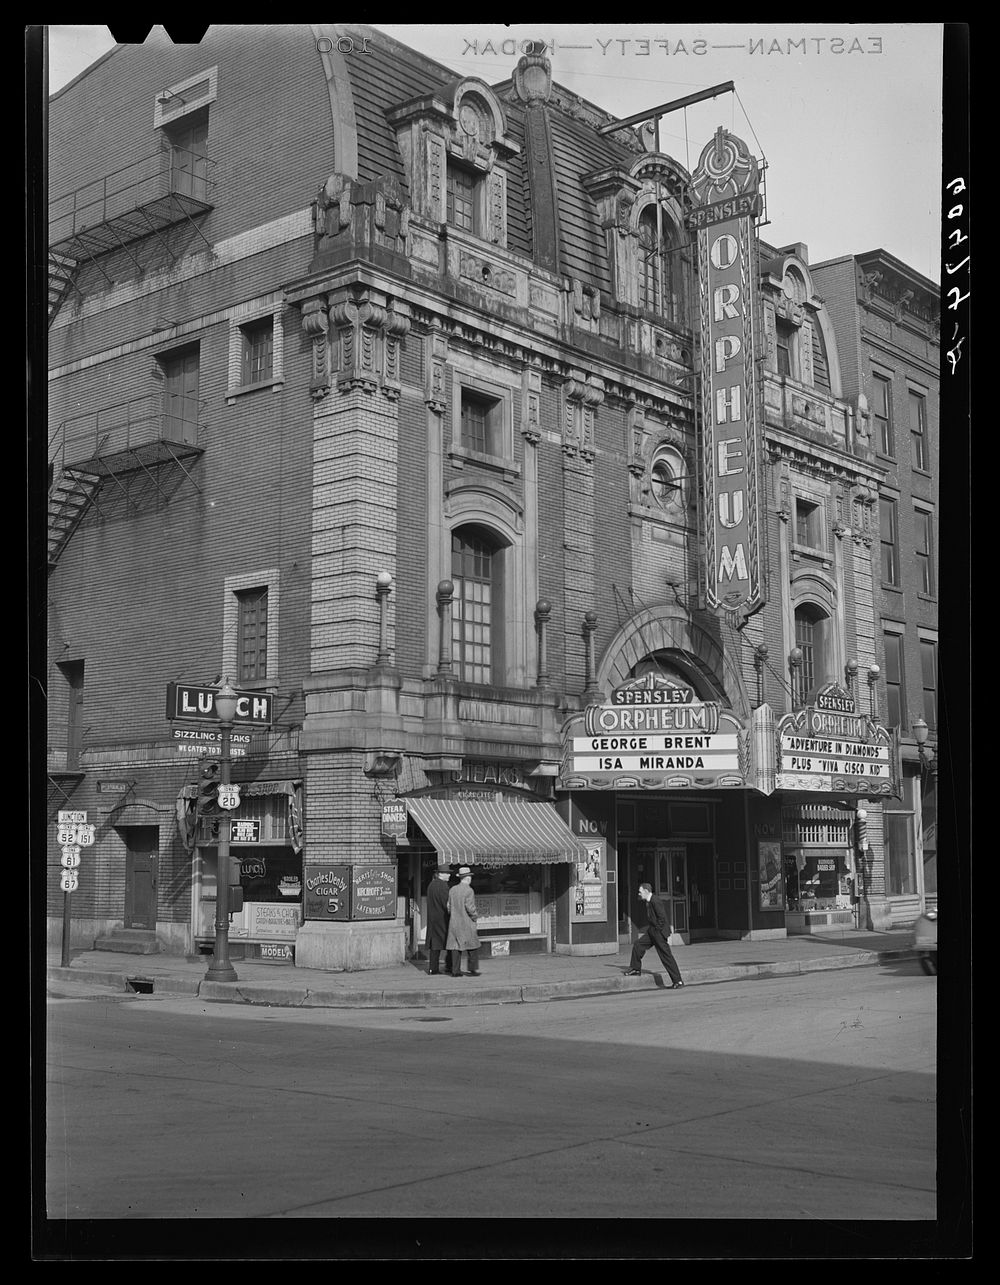 Old Orpheum theater. Dubuque, Iowa. Sourced from the Library of Congress.